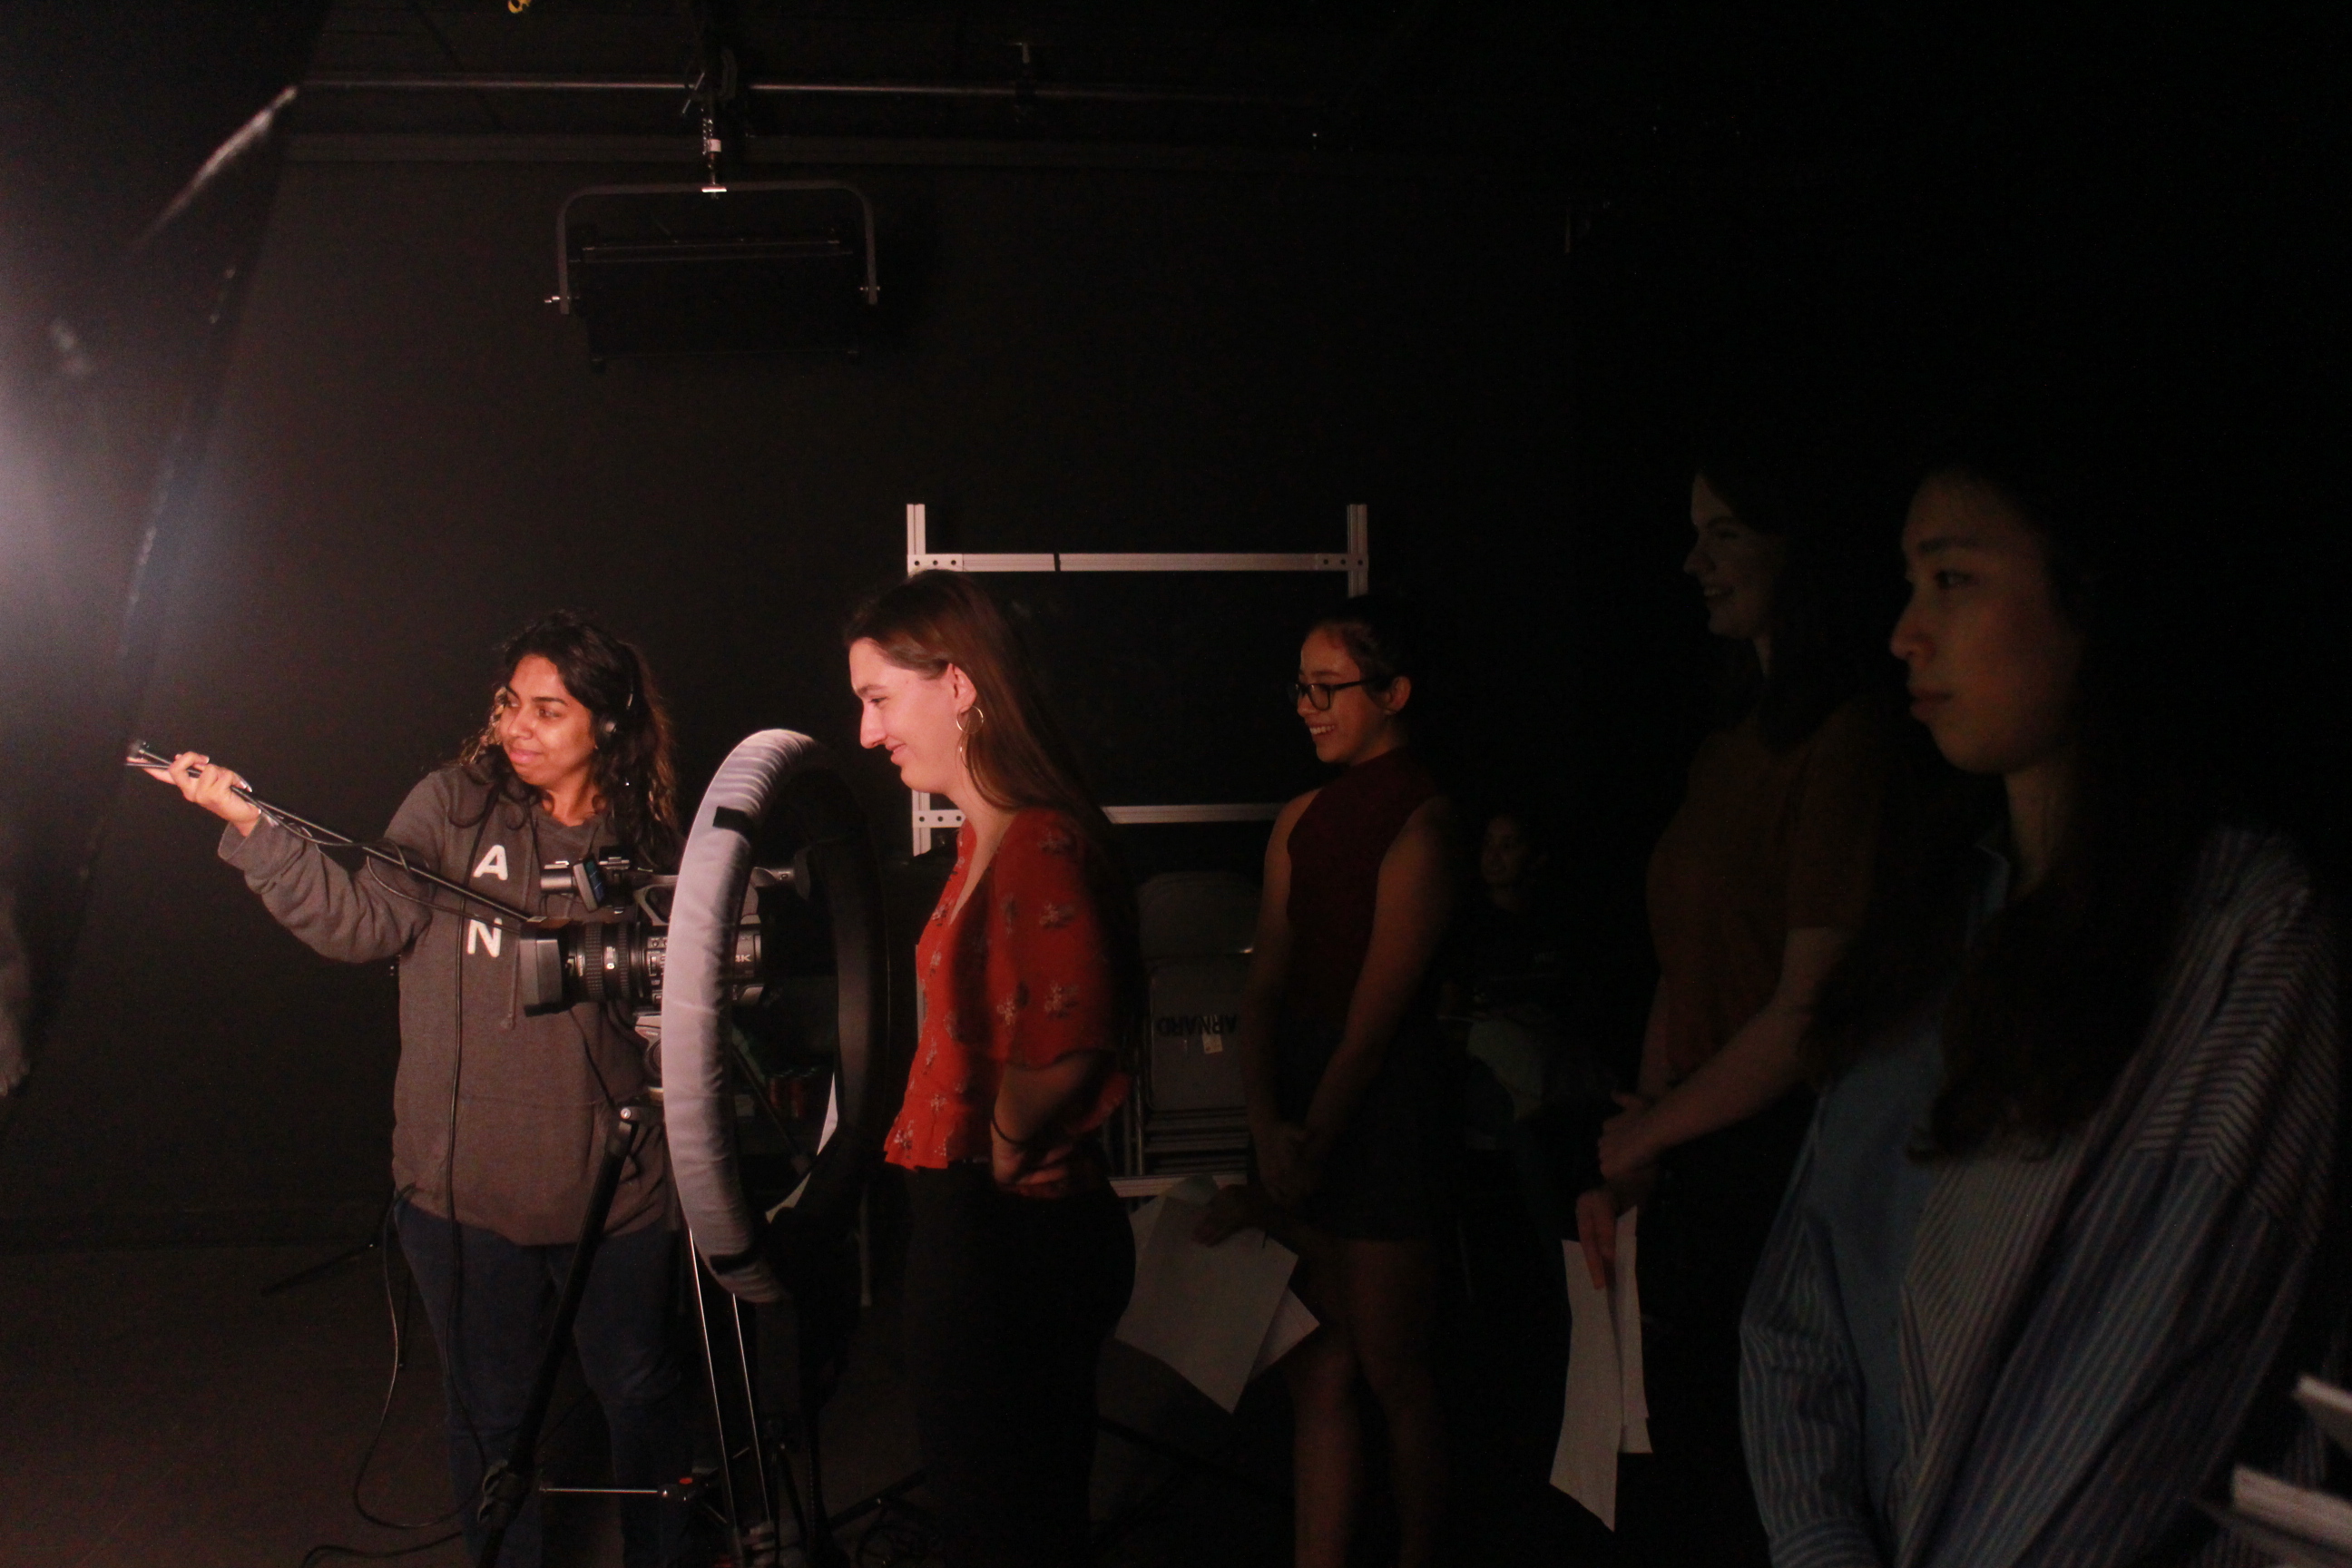 A student extends a microphone boom towards the performers (out of frame), while four other students watch